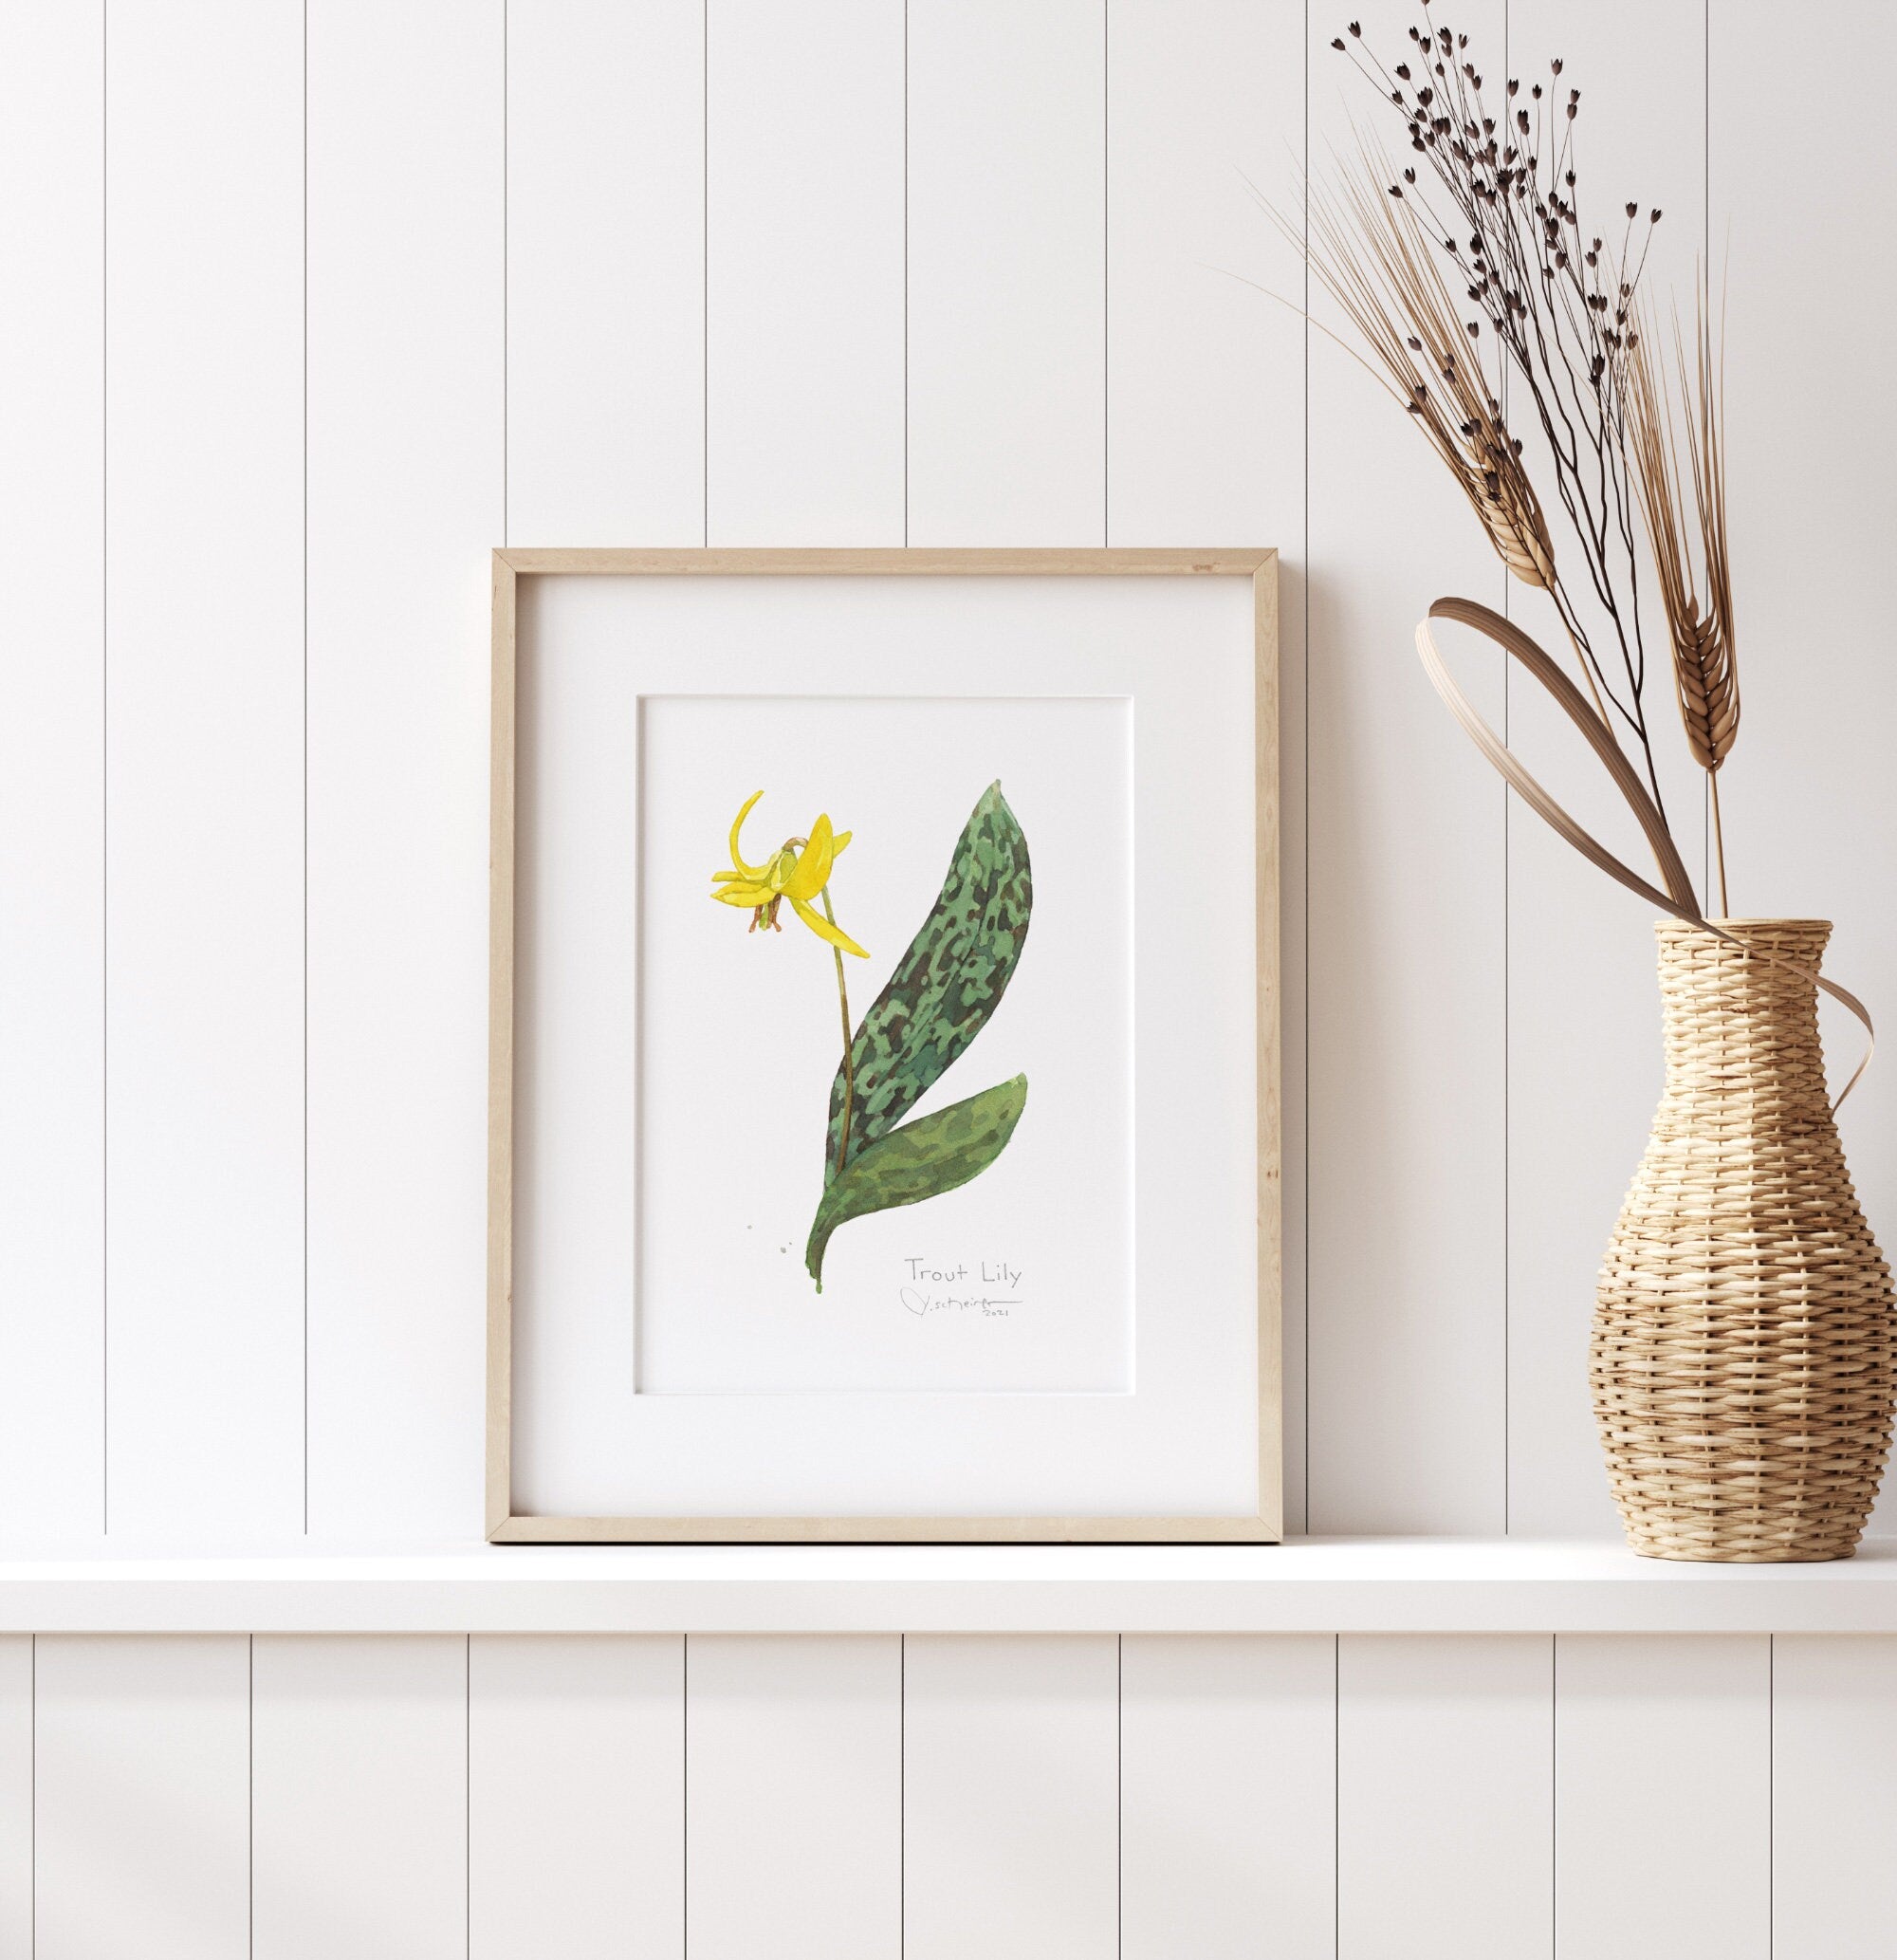 Trout Lily Wildflower Botanical Print, Yellow Woodland Flower Watercolor Art